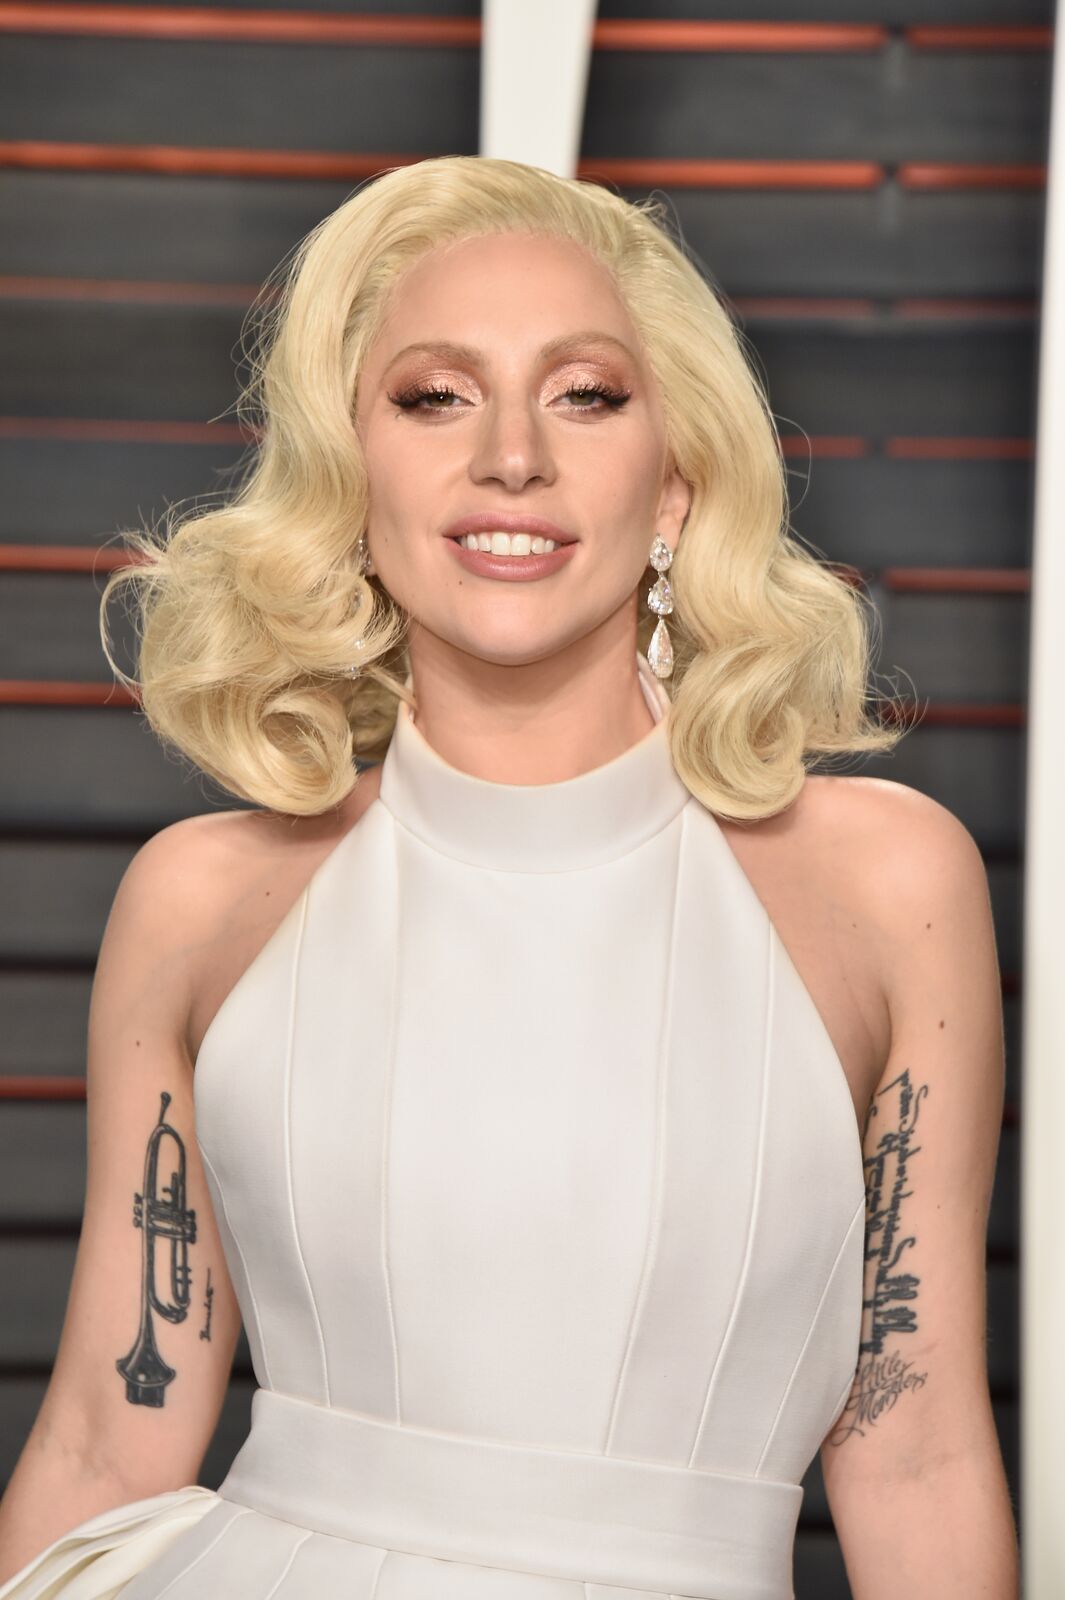 Recording artist Lady Gaga attends the 2016 Vanity Fair Oscar Party Hosted By Graydon Carter at the Wallis Annenberg Center for the Performing Arts on February 28, 2016 | Photo: Getty Images